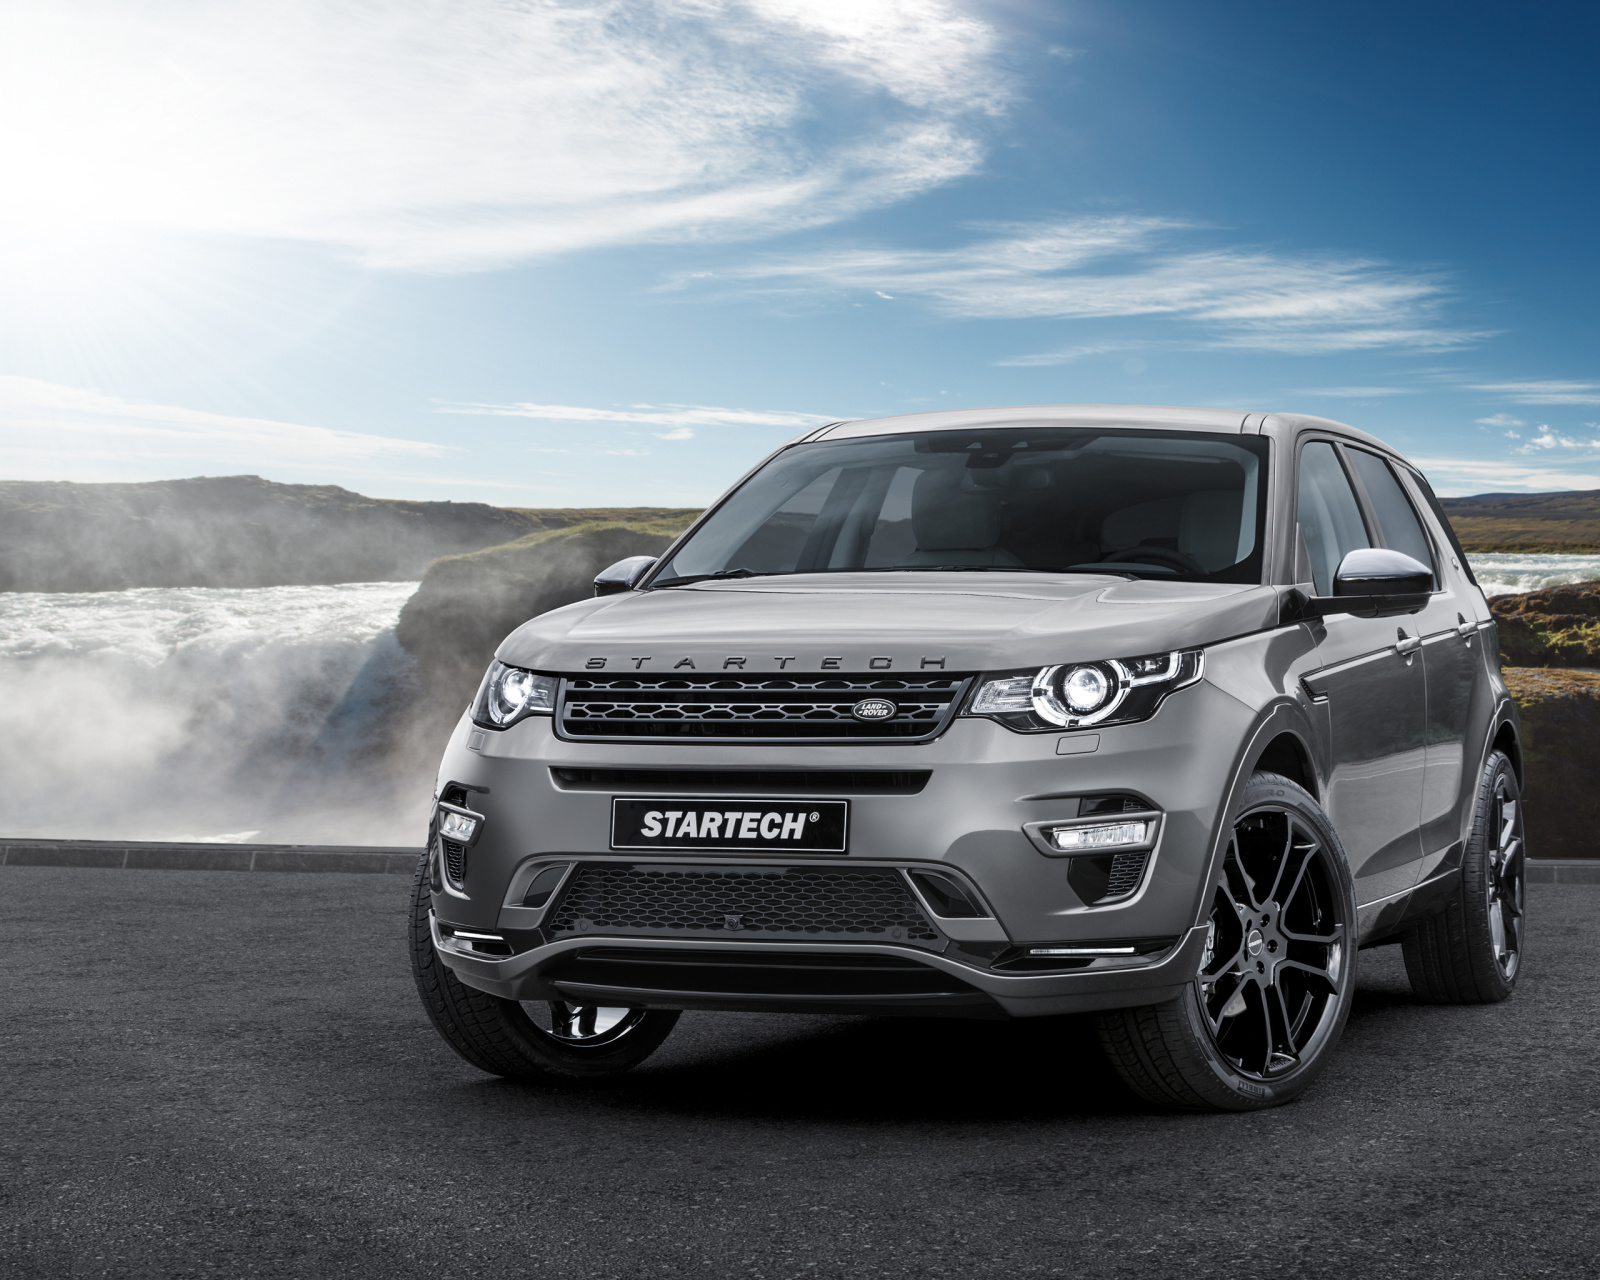 Land Rover Discovery Sport wallpaper 1600x1280